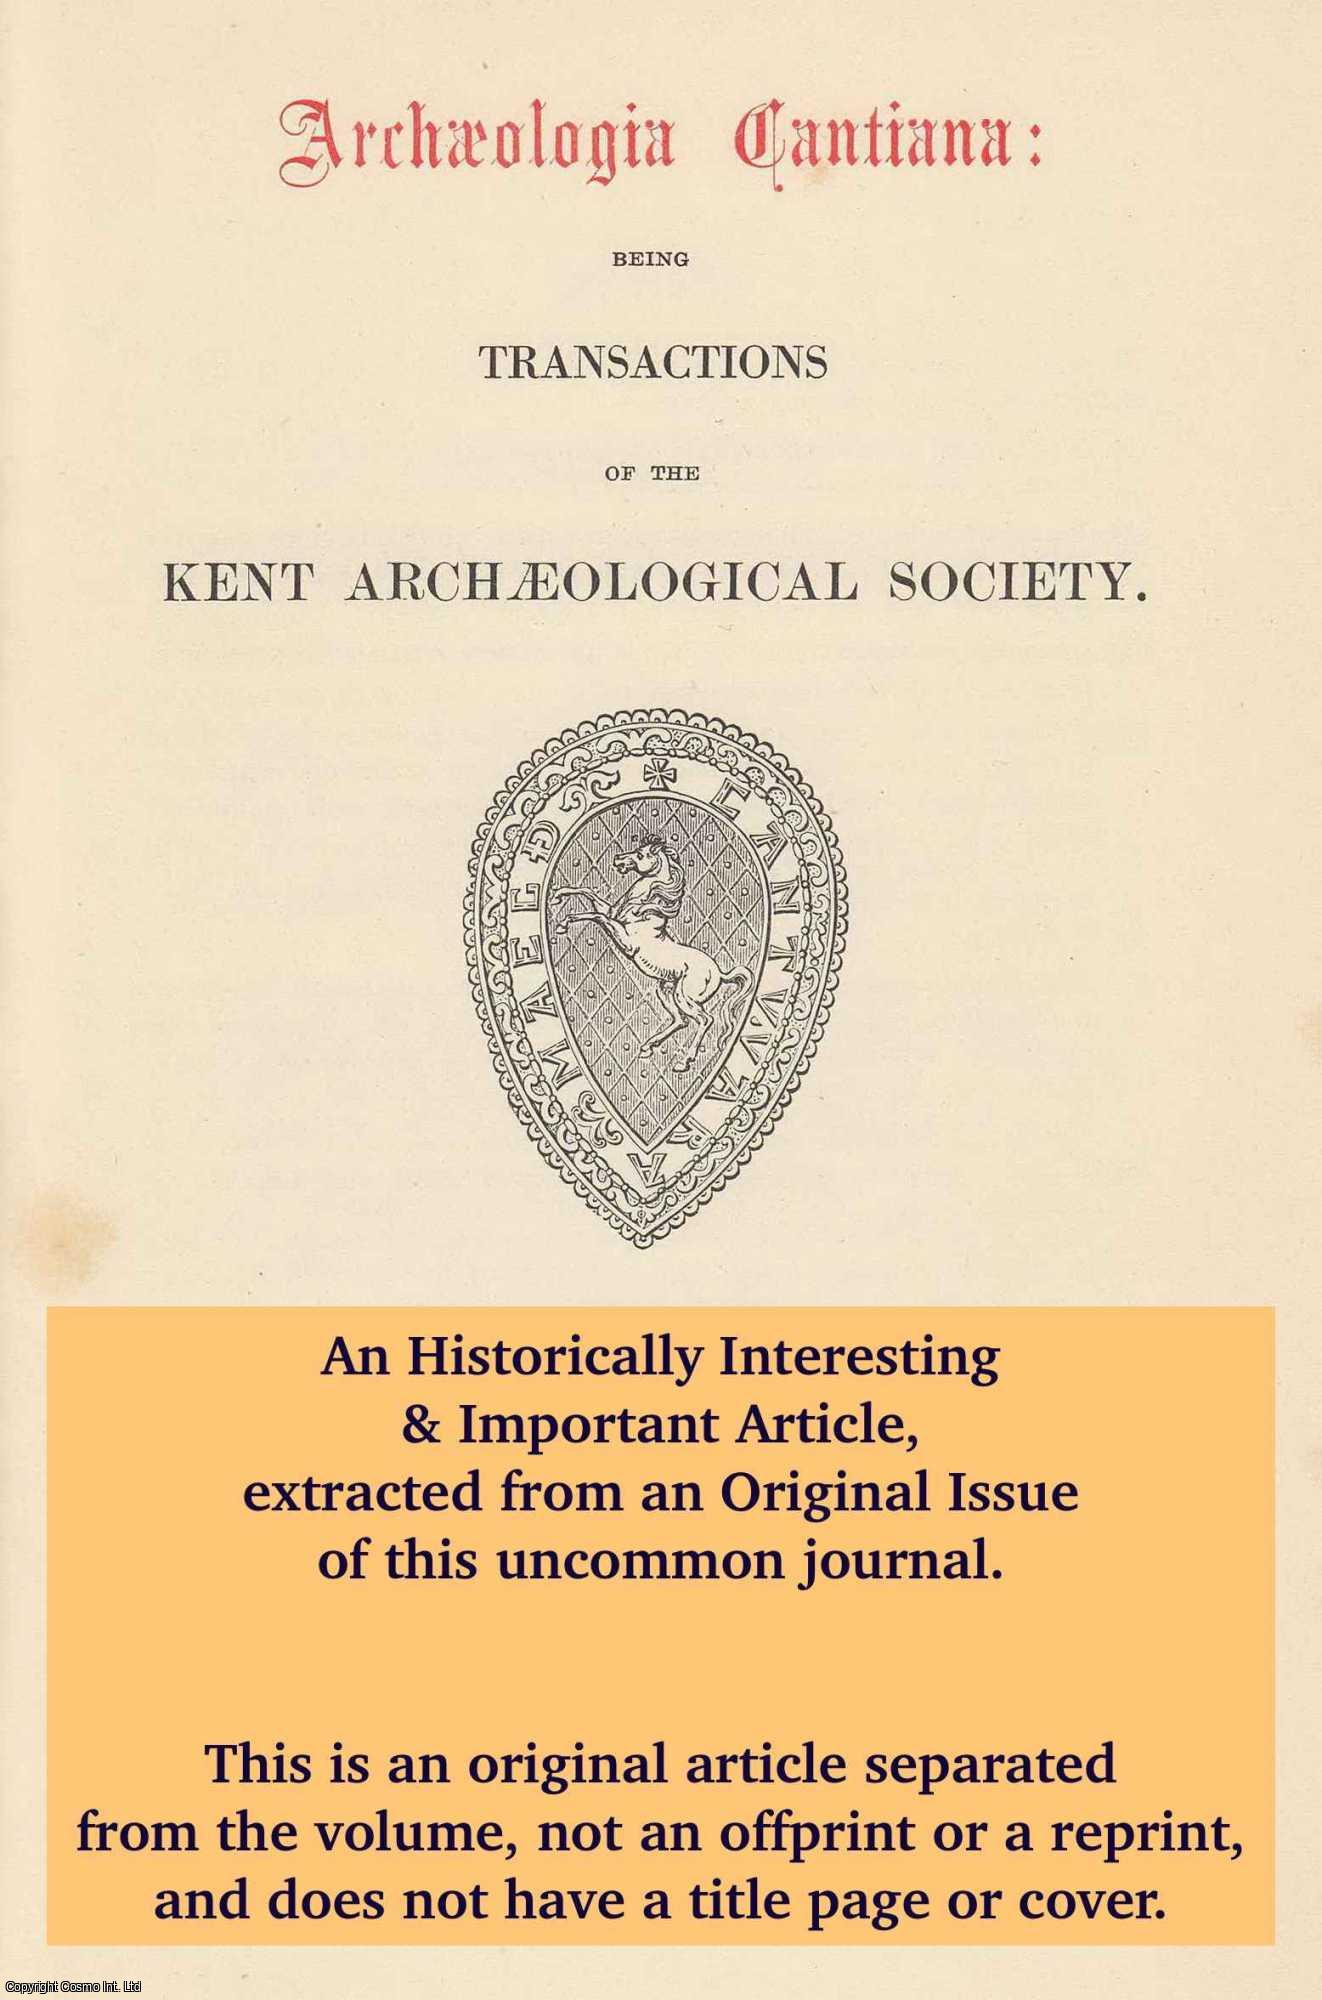 A.P. Detsicas - Excavations at Eccles, 1975. An original article from The Archaeologia Cantiana: Transactions of The Kent Archaeological Society, 1977.